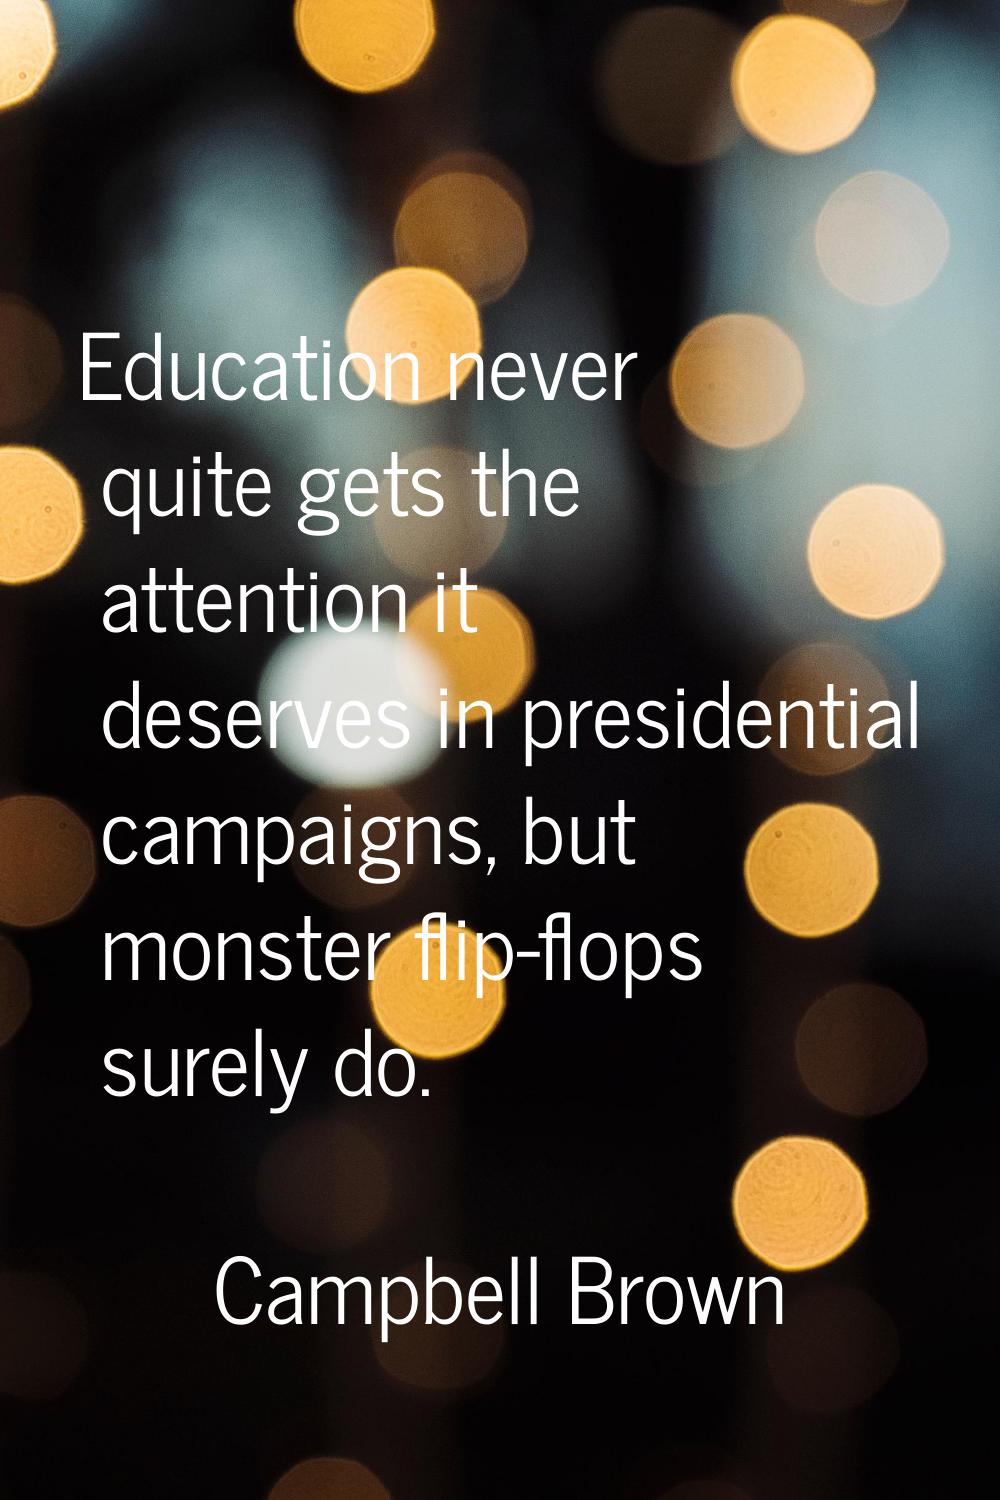 Education never quite gets the attention it deserves in presidential campaigns, but monster flip-fl